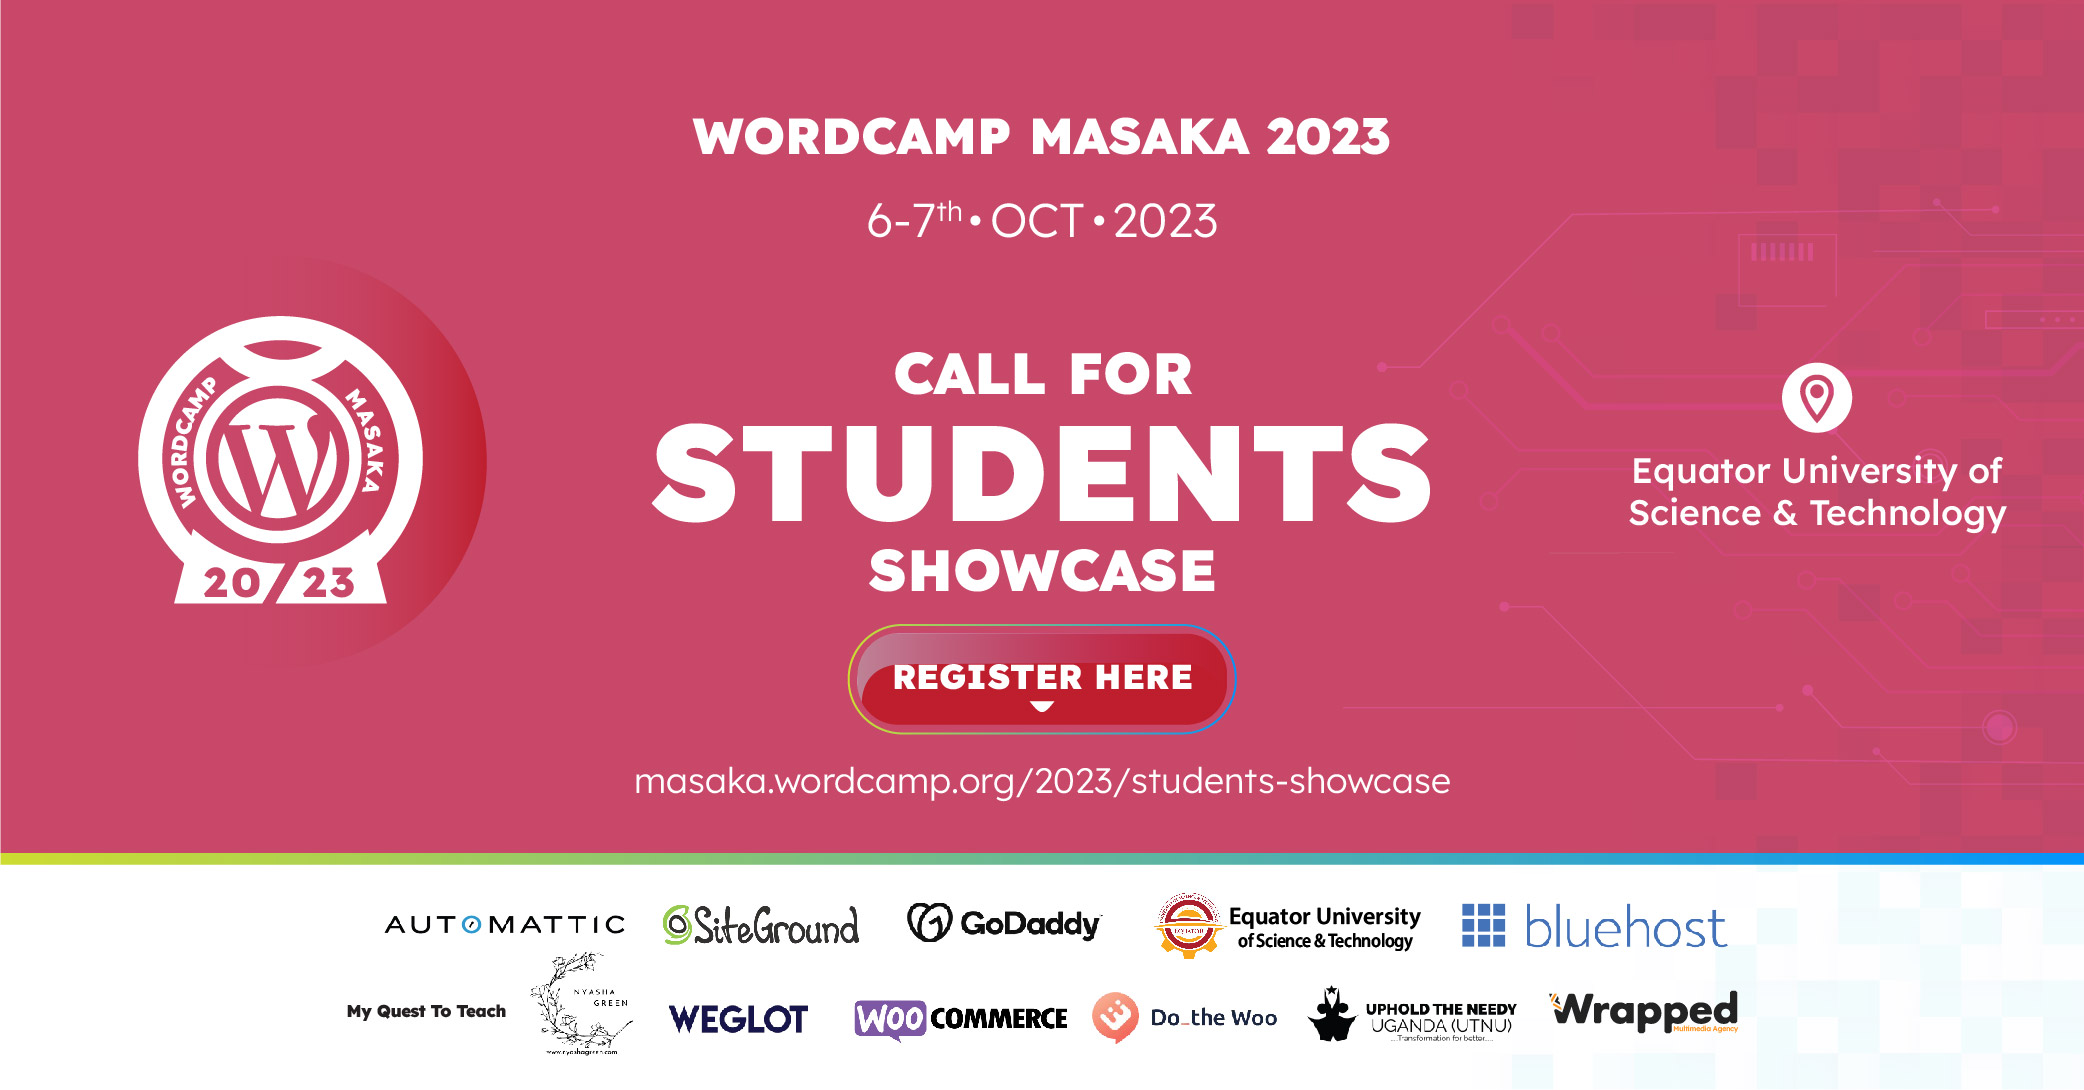 Call for Students Showcase